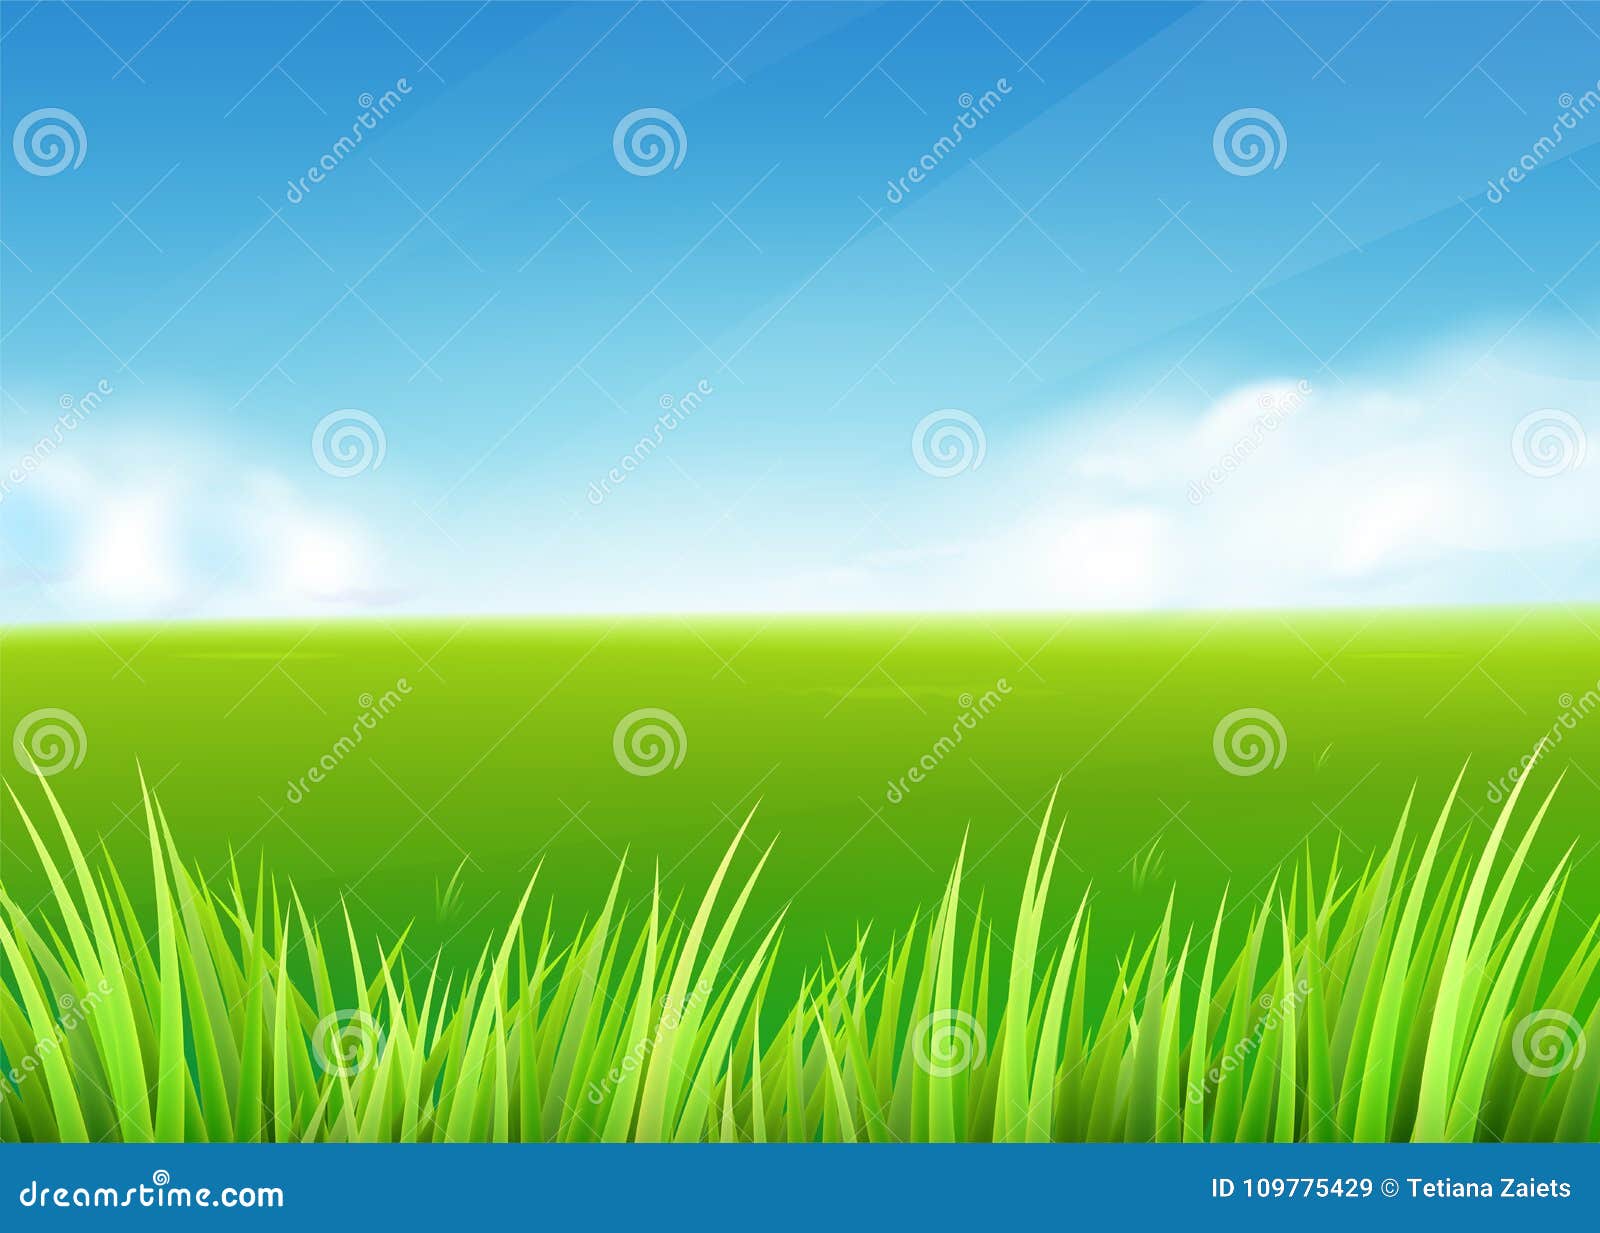 meadow field. summer or spring nature background with green grass landscape